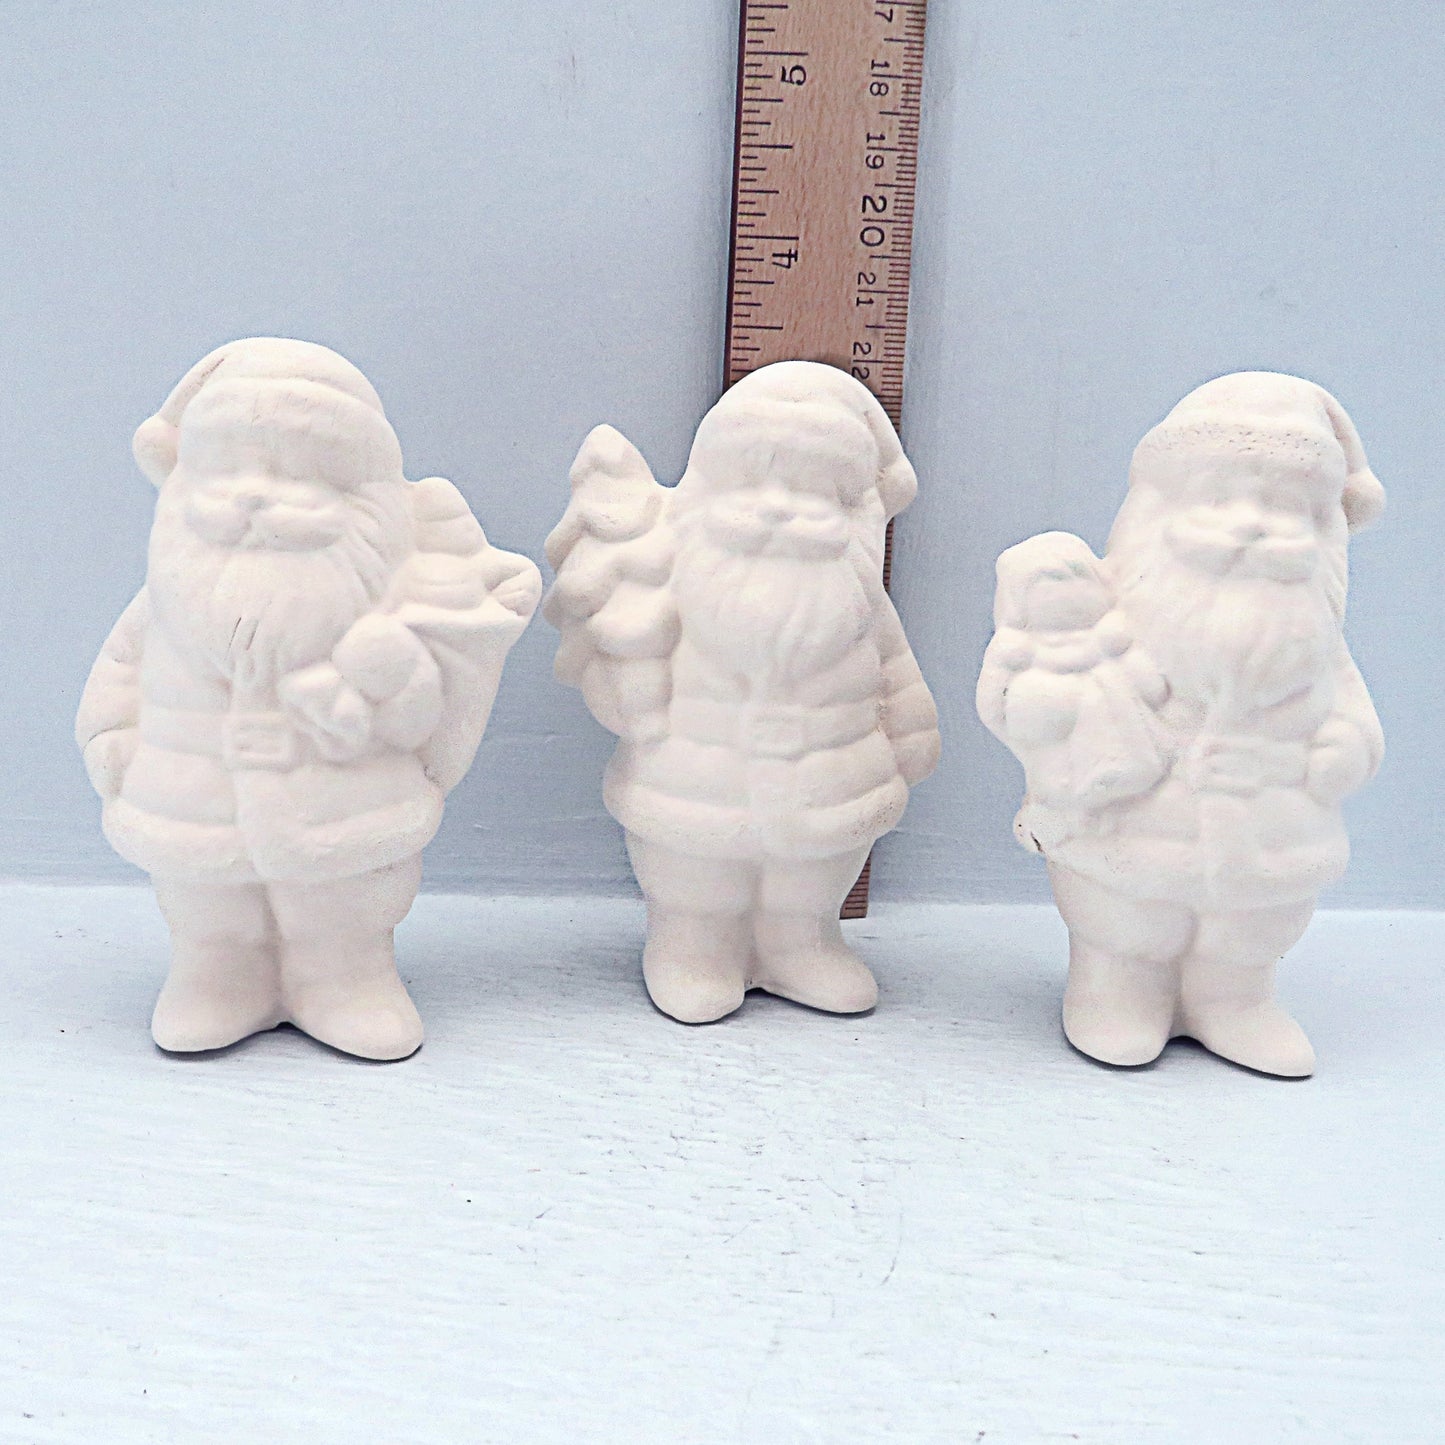 Set of 3 Santas facing forward in front of a ruler, showing them to be approximately 3 inches tall